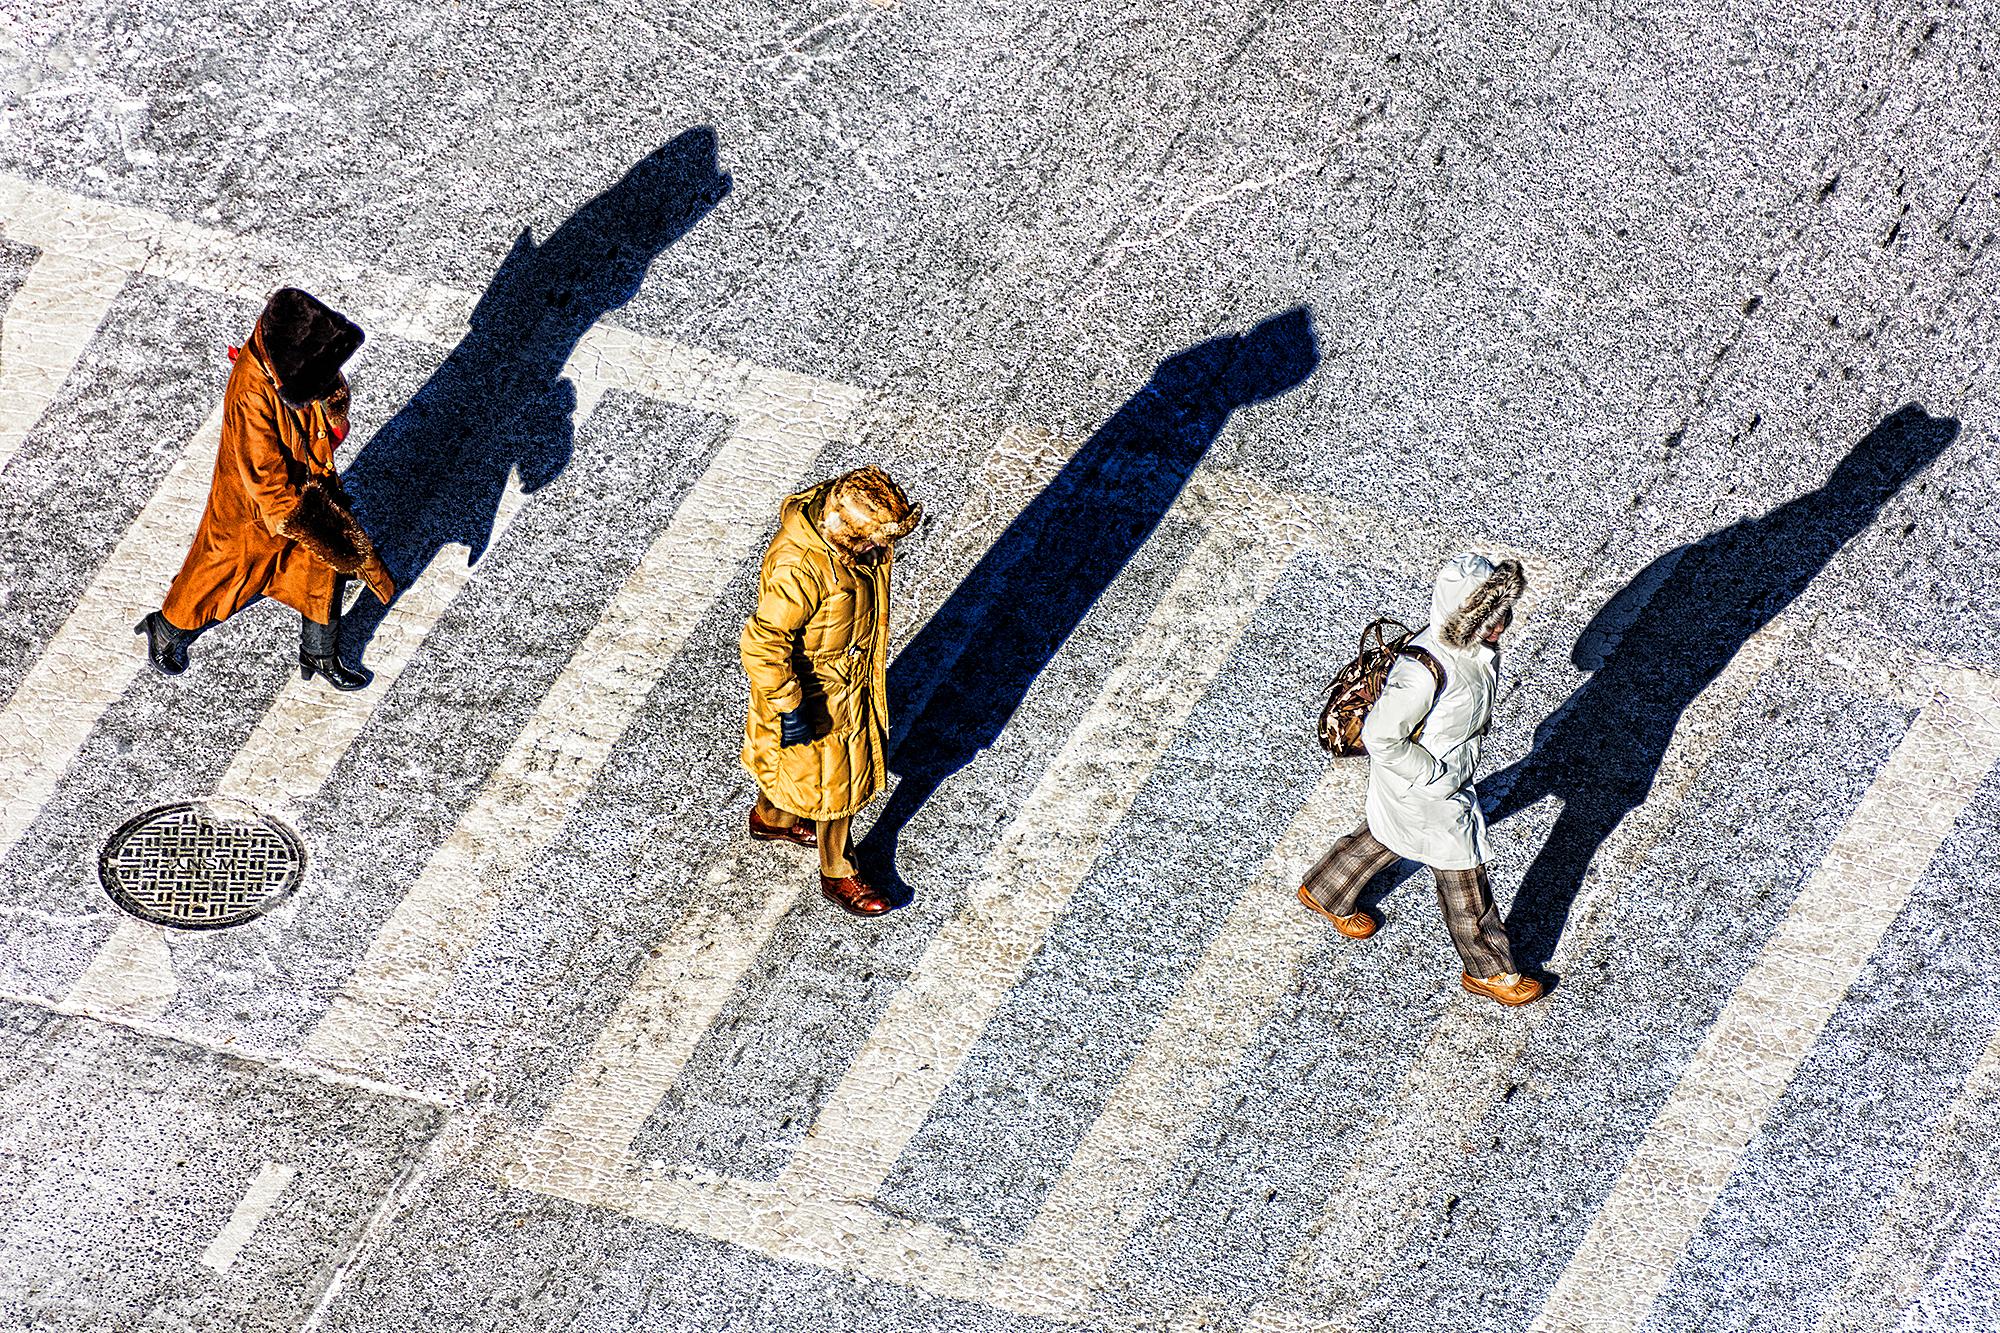 Mitchell Funk Abstract Photograph - Synchronous Pedestrians - Three Figures Crosswalk 